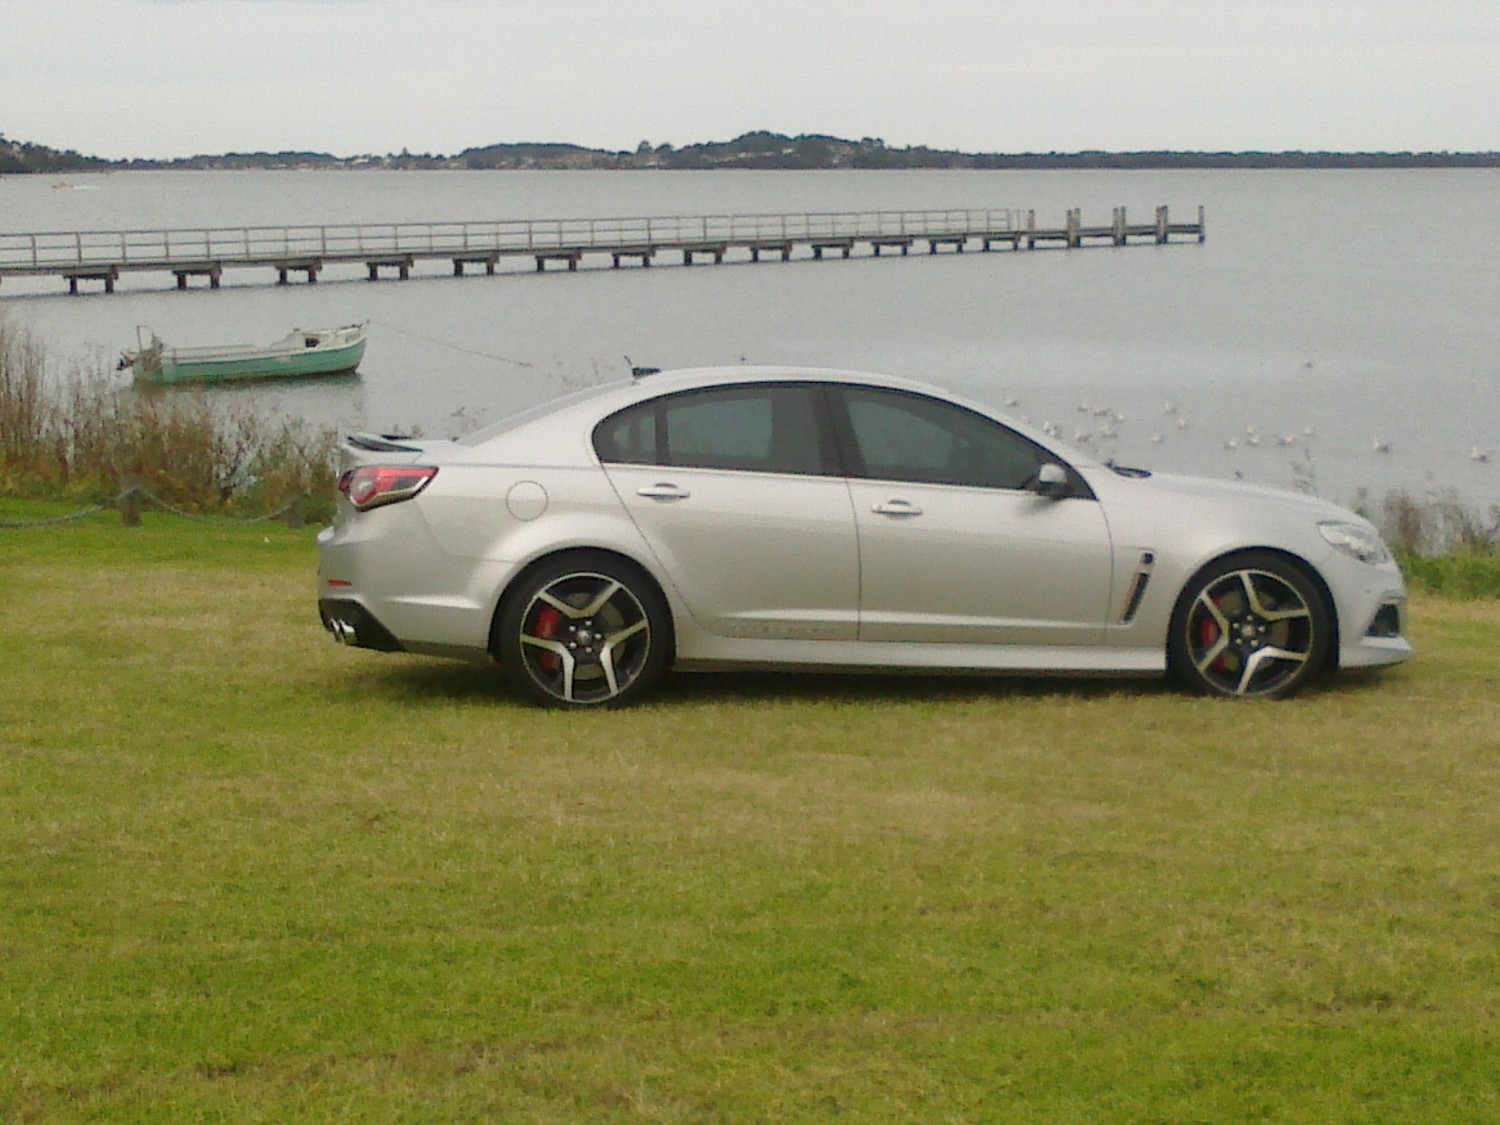 2013 Holden COMMODORE VF CLUBSPORT R8